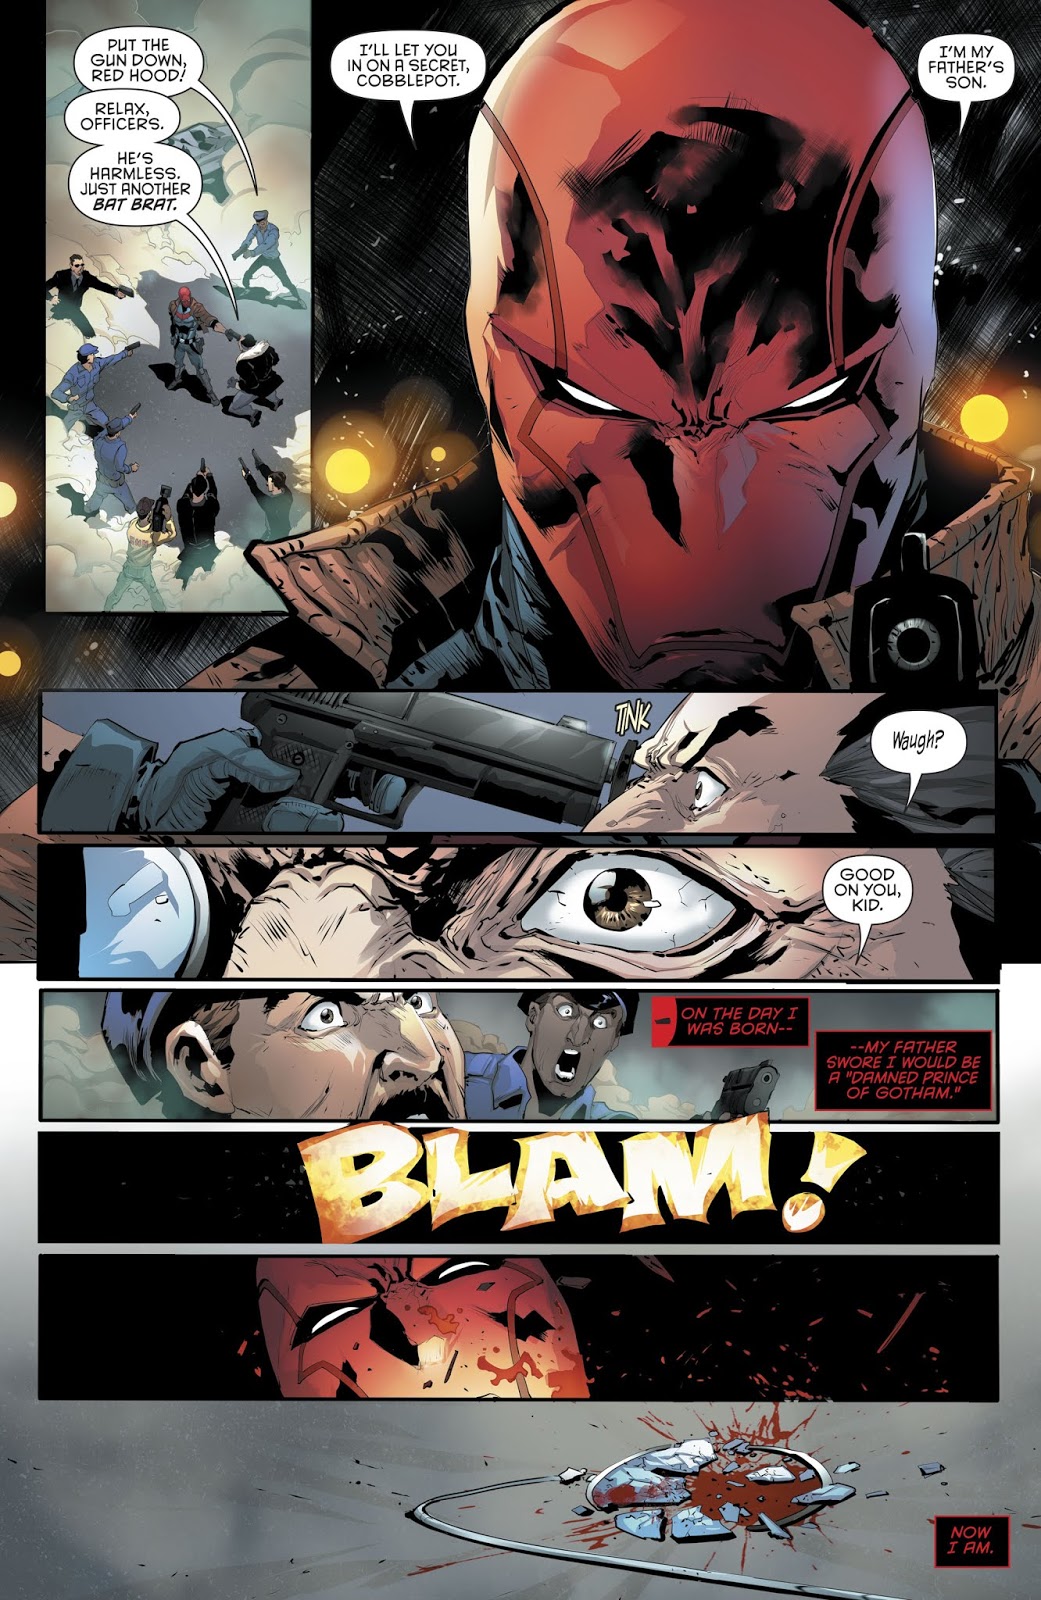 red hood and the outlaw #24 3